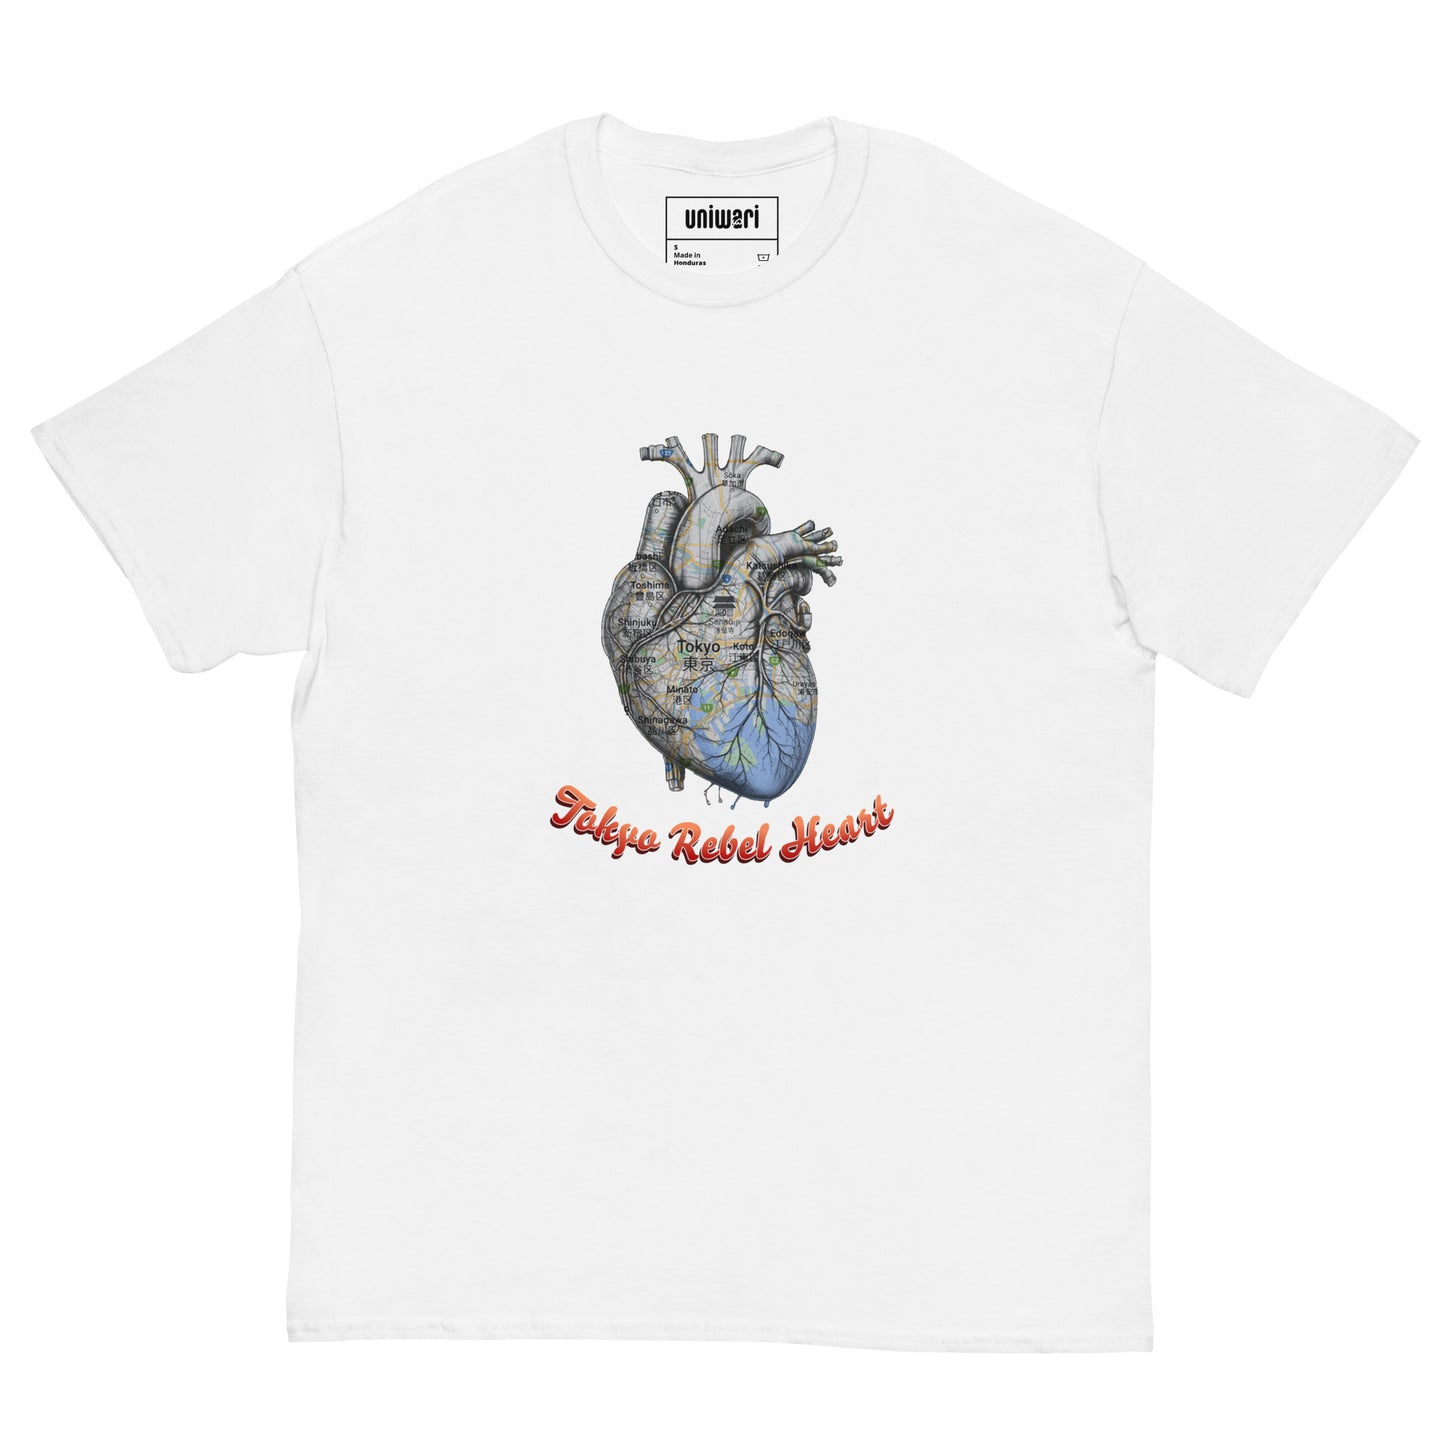 White High Quality Tee - Front Design with a Heart Shaped Map of Tokyo and a Phrase "Tokyo Rebel Heart" print